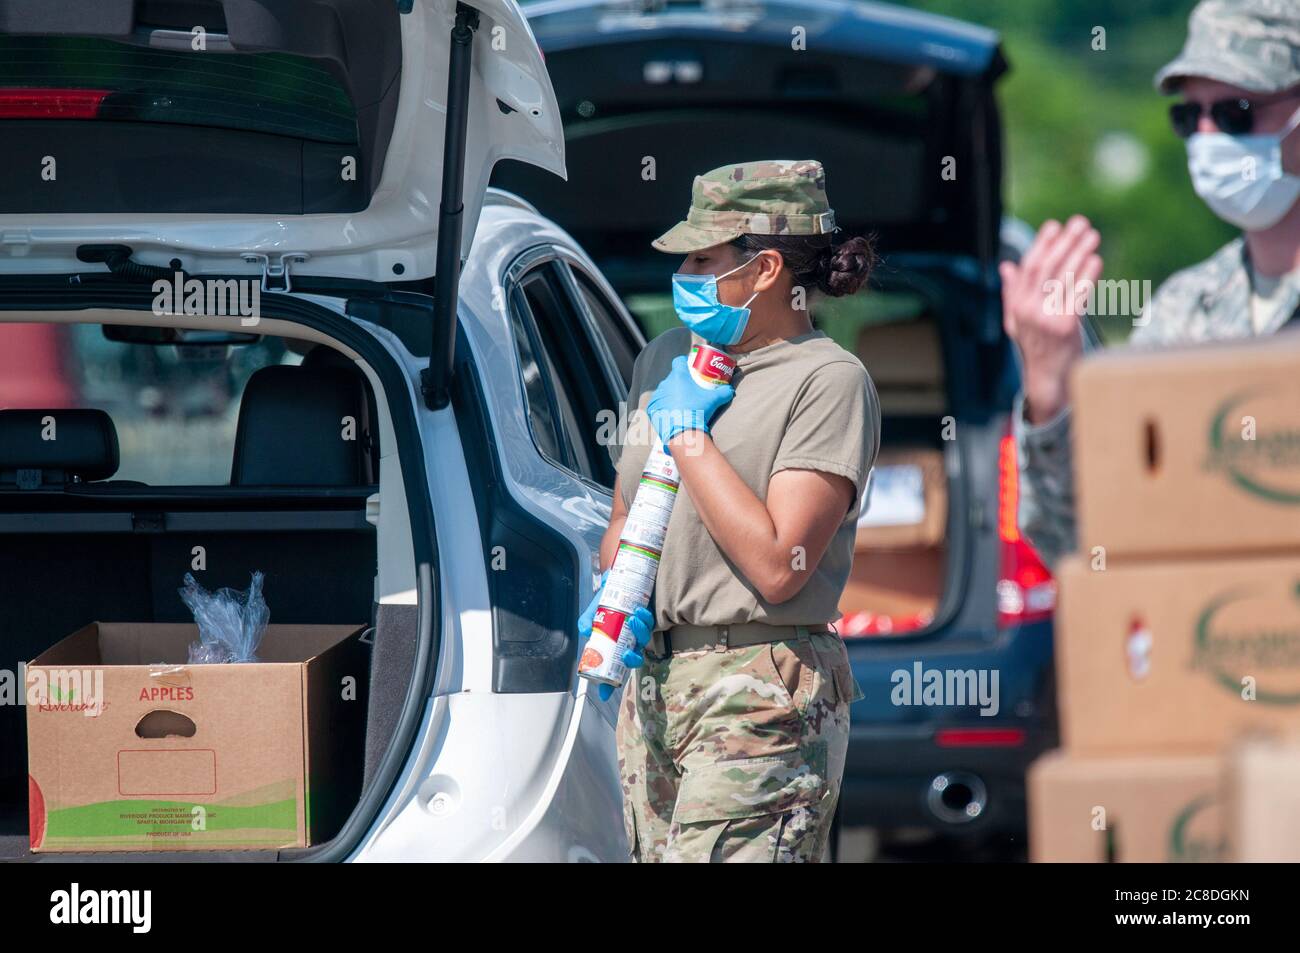 U.S. Army Pfc. Stephanie Huertas, a motor transport operator with the Delaware Army National Guard's 1049th Transportation Company, carries a stack of cans at a drive-thru food pantry on the grounds of Dover International Speedway in Dover, Delaware, June 24, 2020. About 25 soldiers and airmen of the National Guard joined volunteers with the Food Bank of Delaware there, distributing much-needed pantry items to address the increased demand for food assistance amid COVID-19. (U.S. Army National Guard photo by Capt. Brendan Mackie) Stock Photo